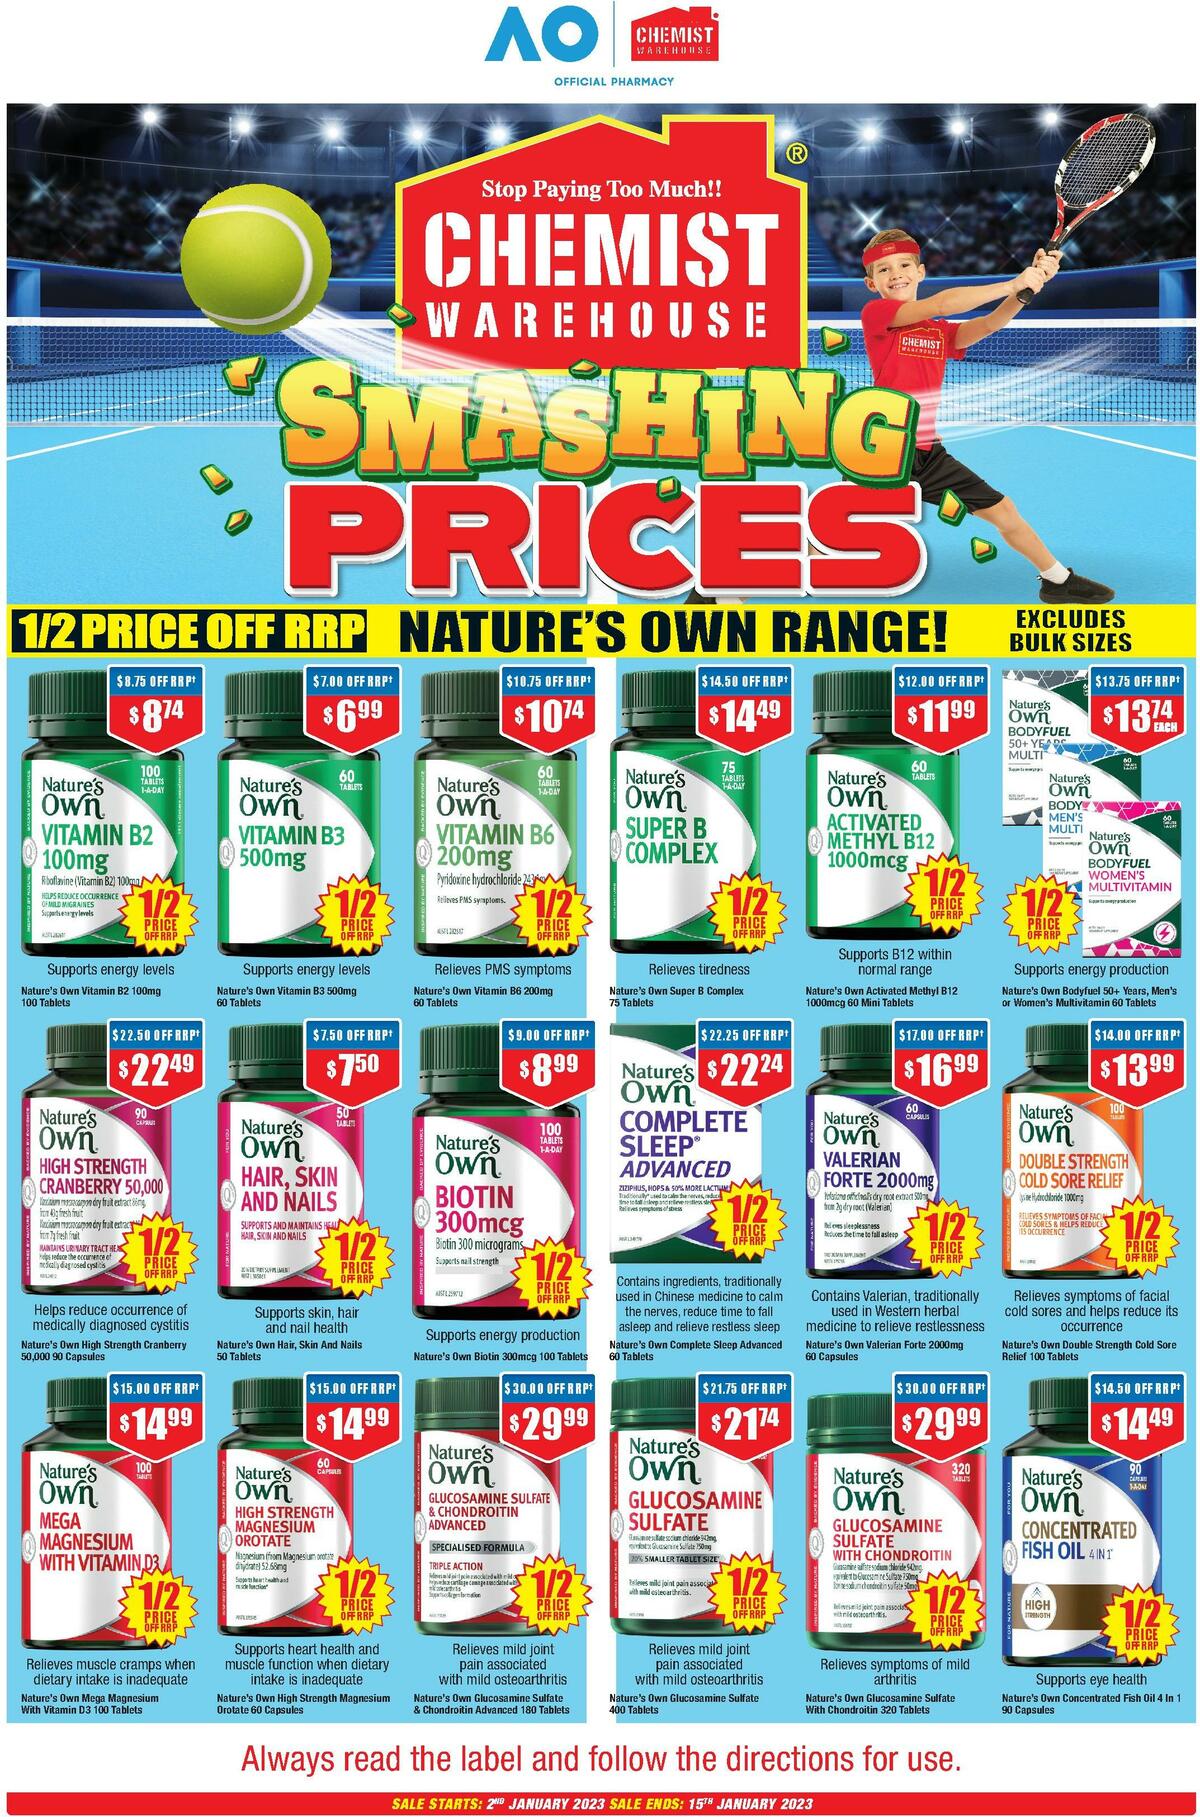 Chemist Warehouse Catalogues from 2 January